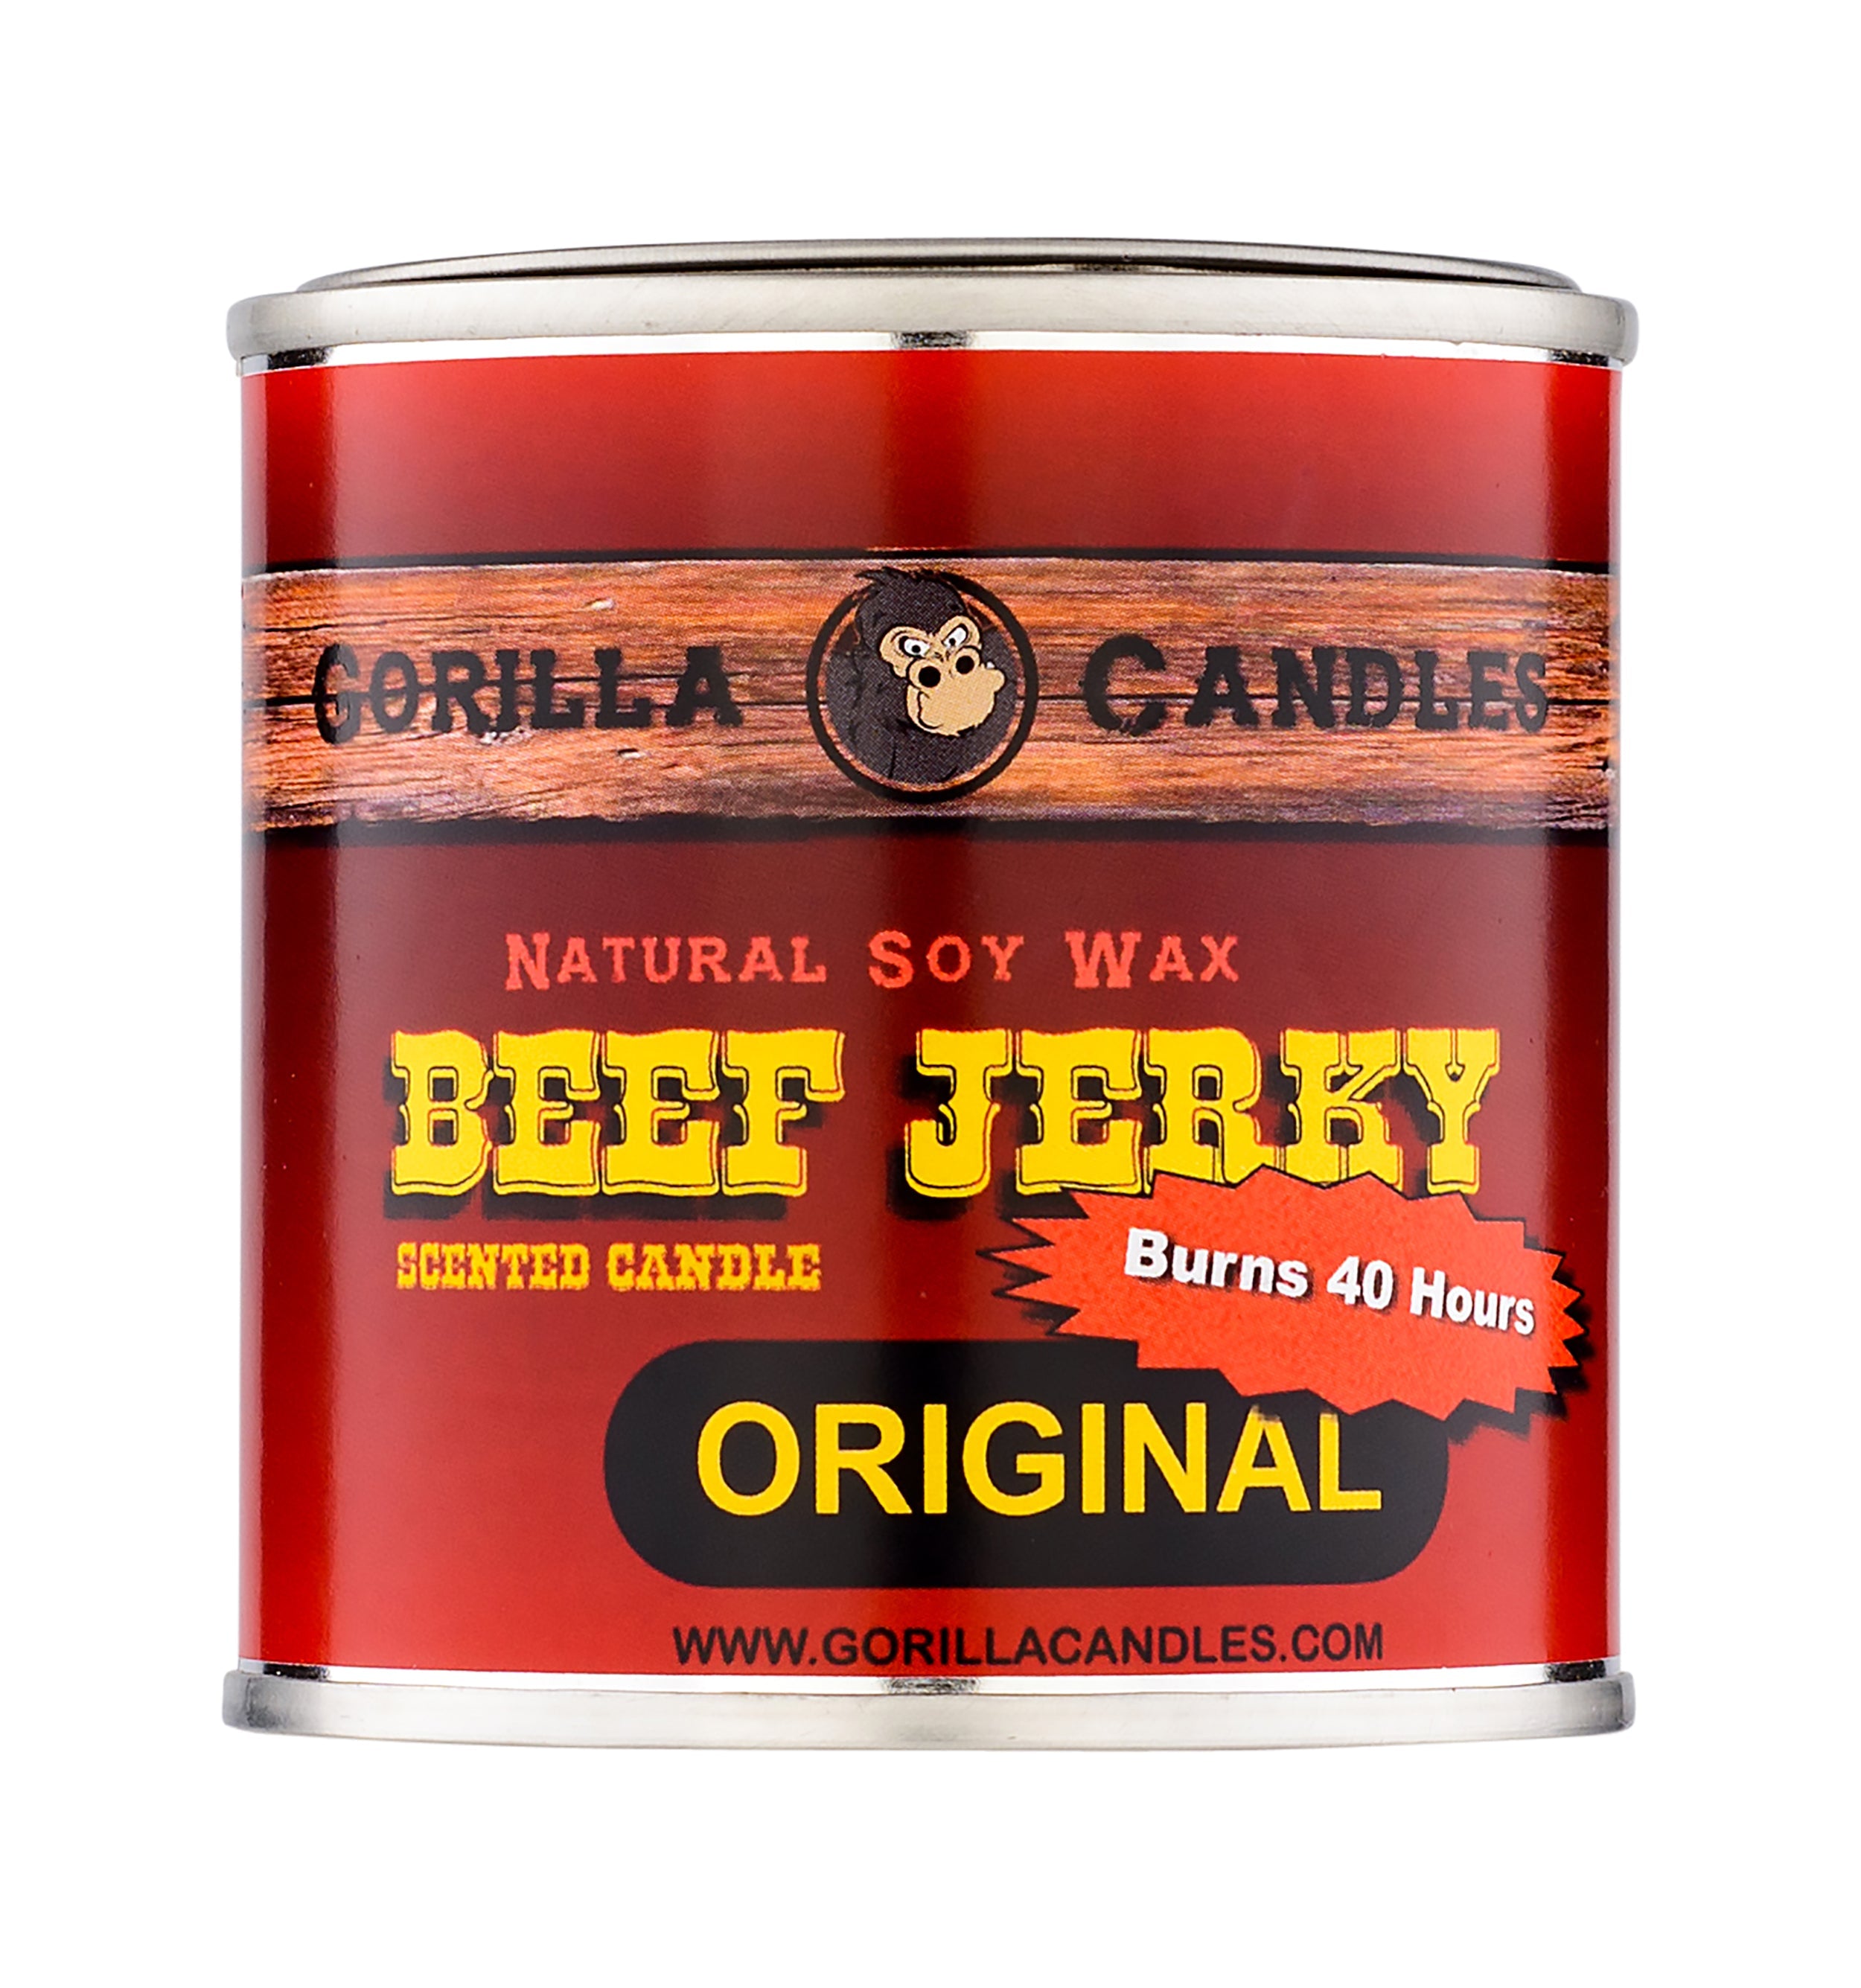 Beef Jerky by Gorilla Candles™